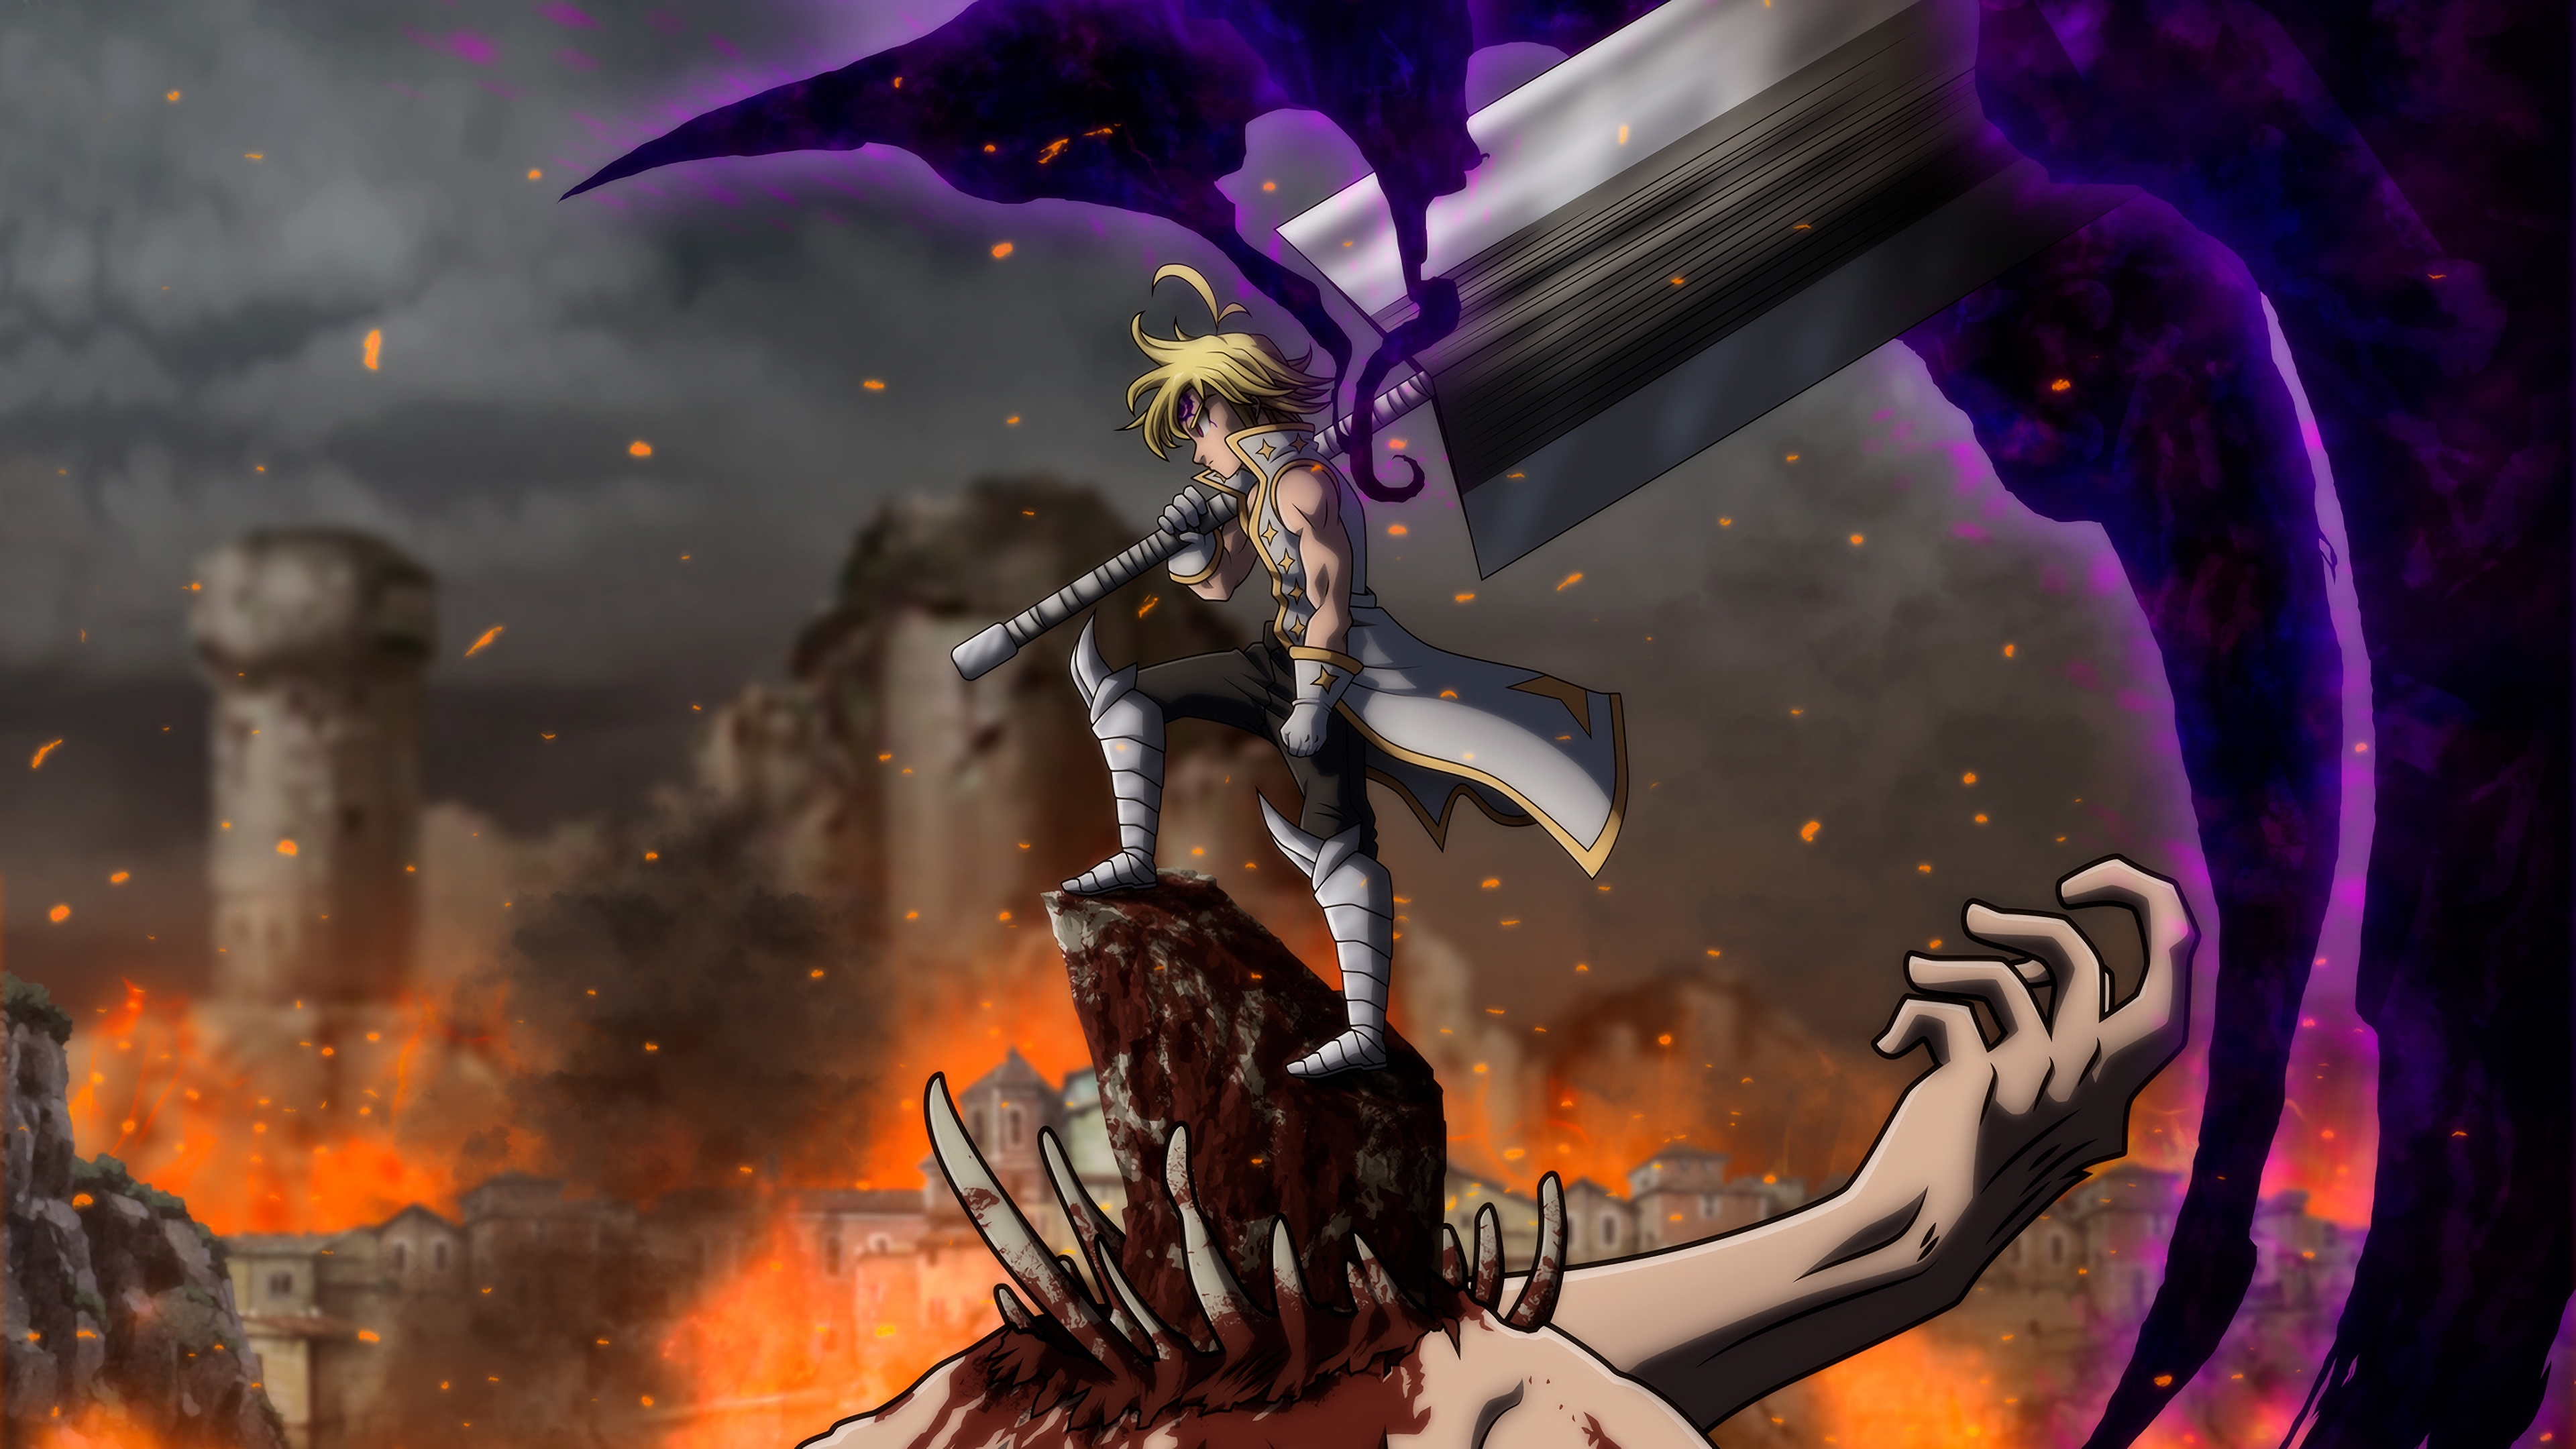  Demon King The Seven Deadly Sins HD Wallpapers and Backgrounds